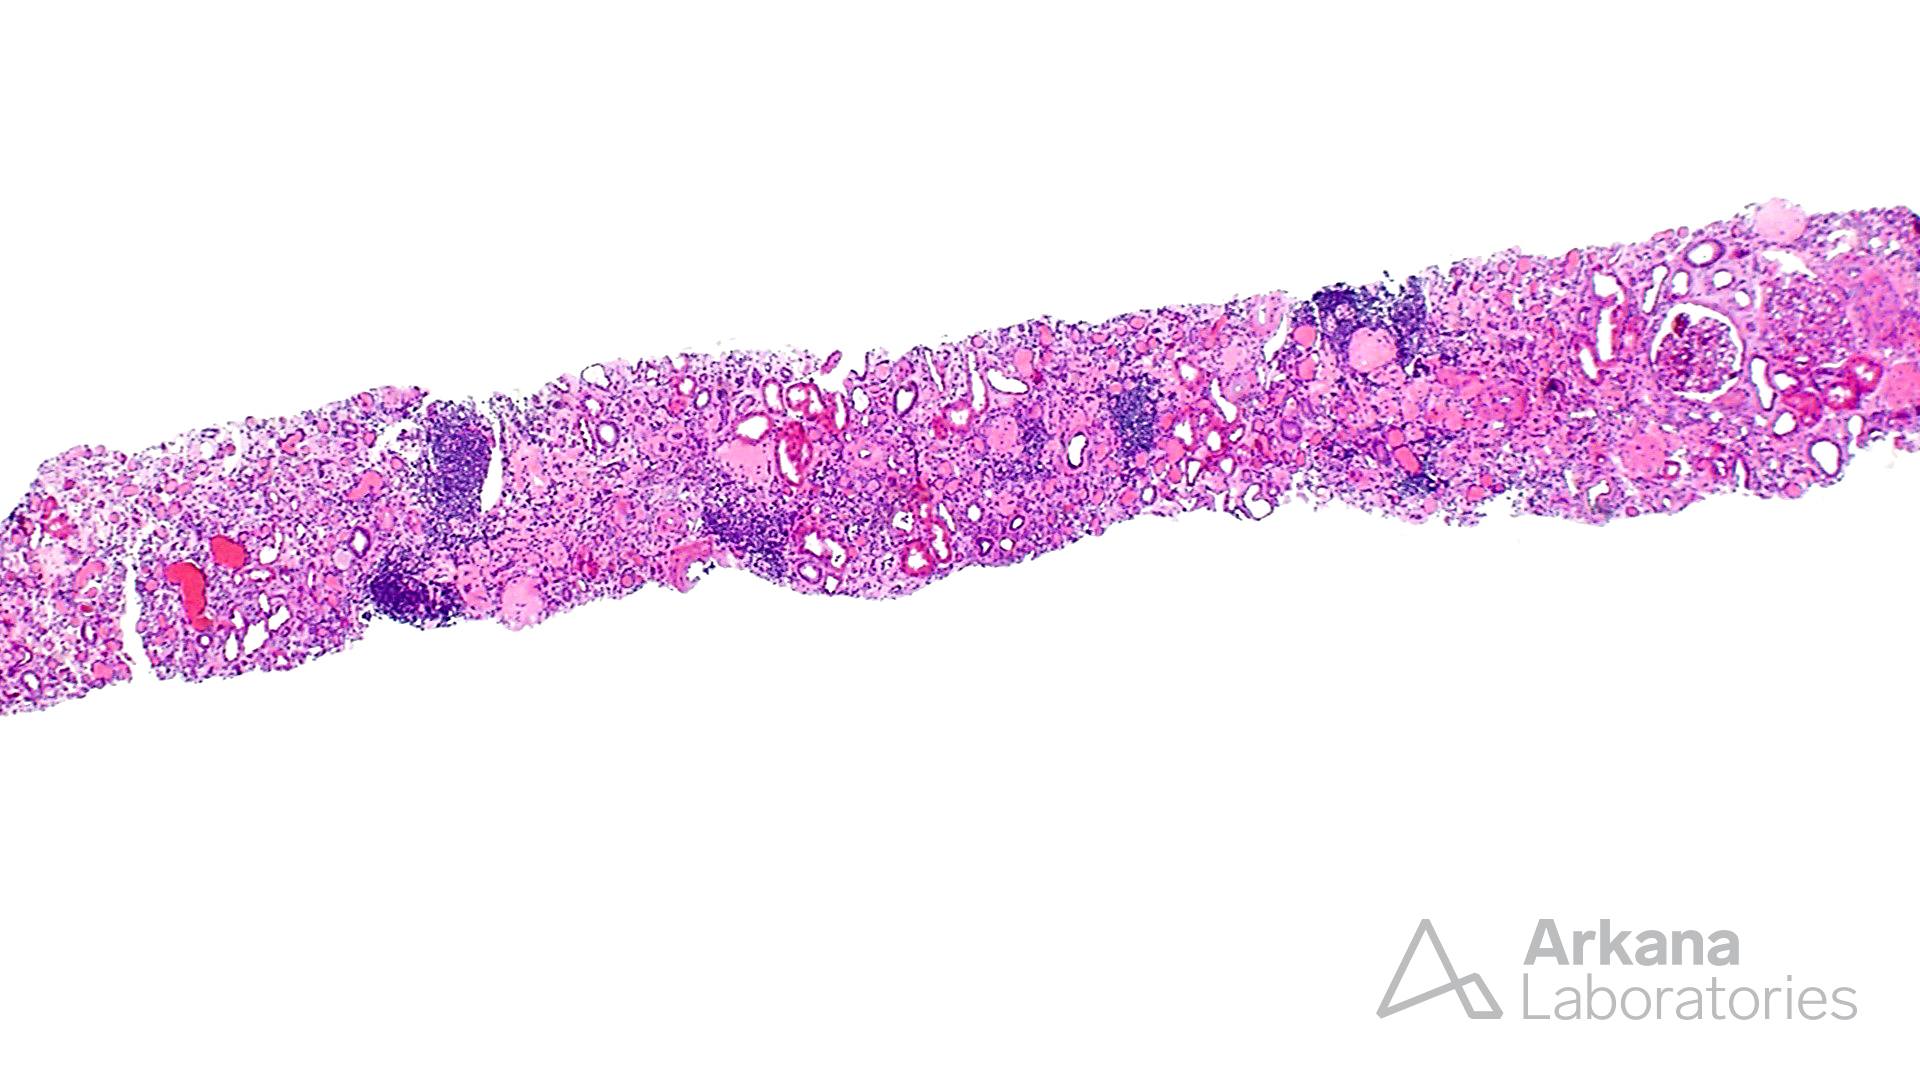 renal cortex from renal biopsy showing Atheroembolism